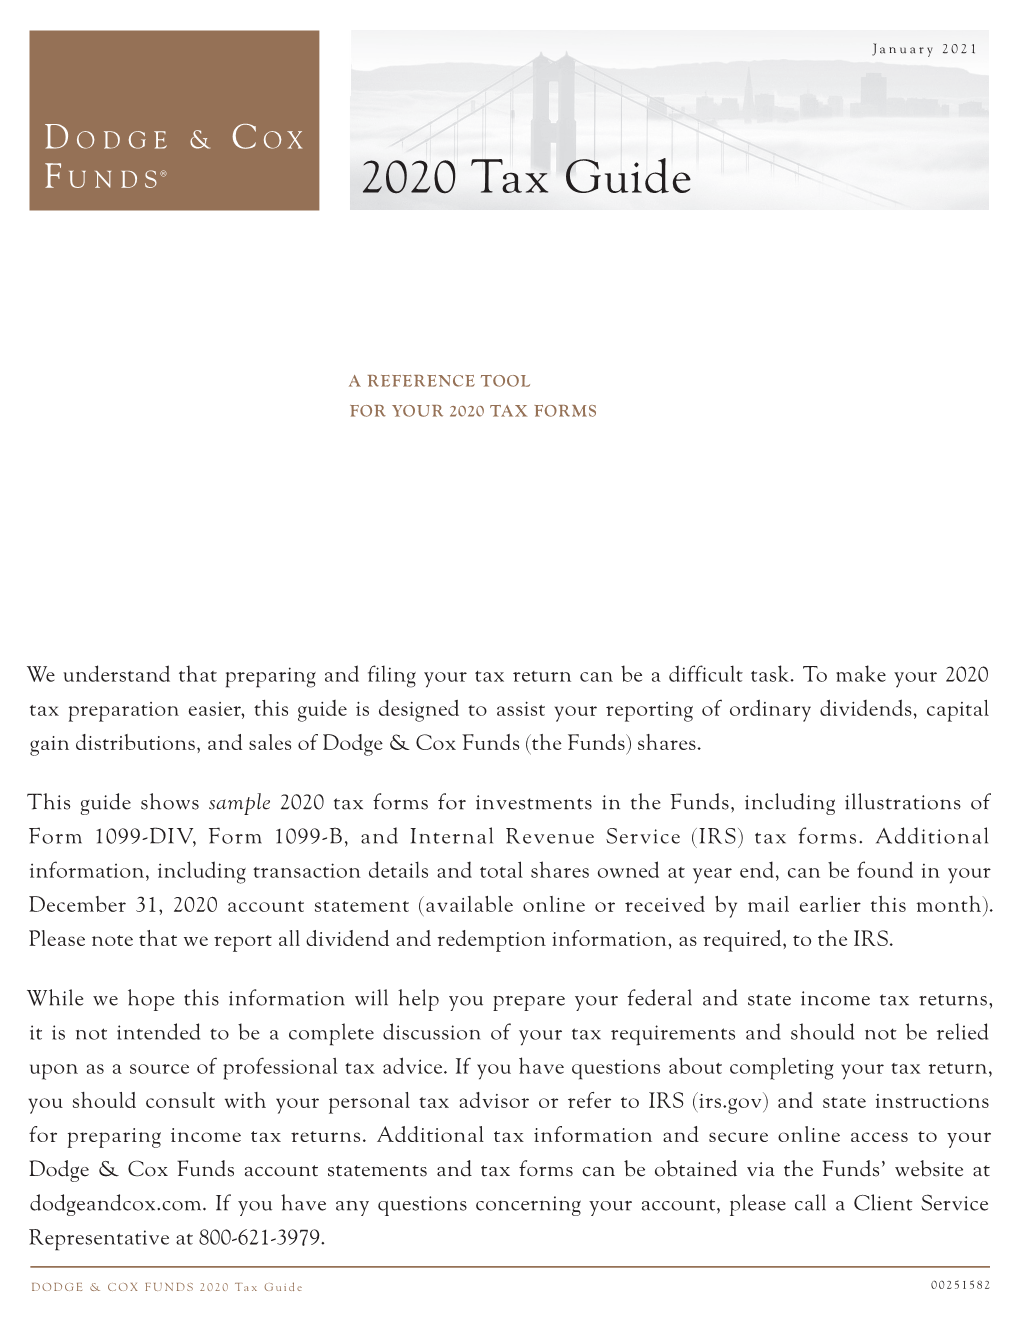 Dodge & Cox Funds 2020 Tax Guide